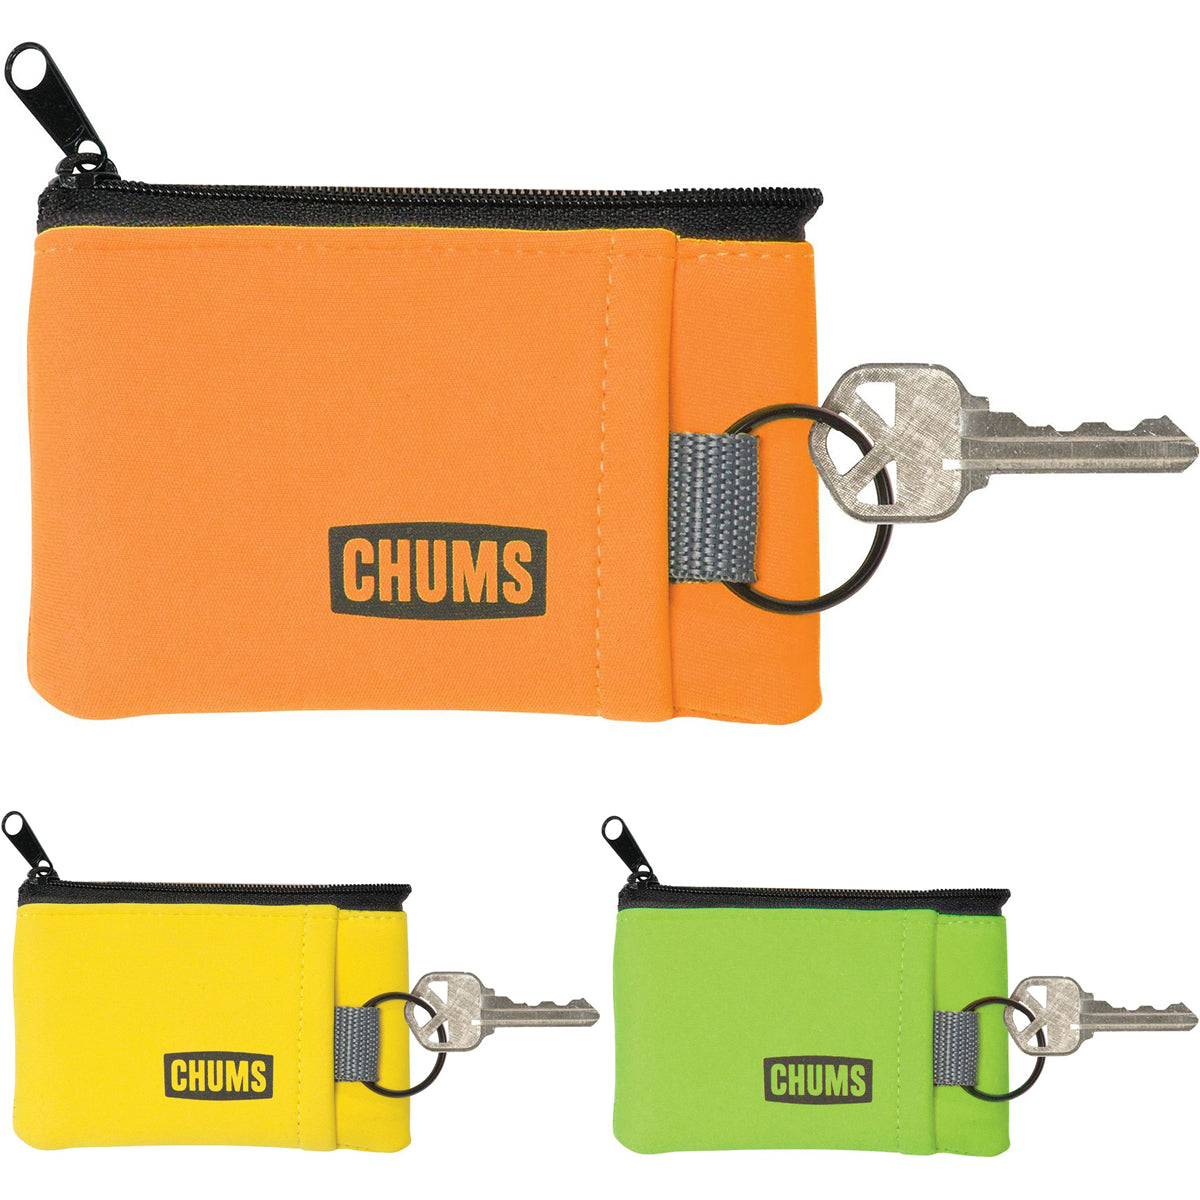 Chums Floating Marsupial Keychain Wallet Chums